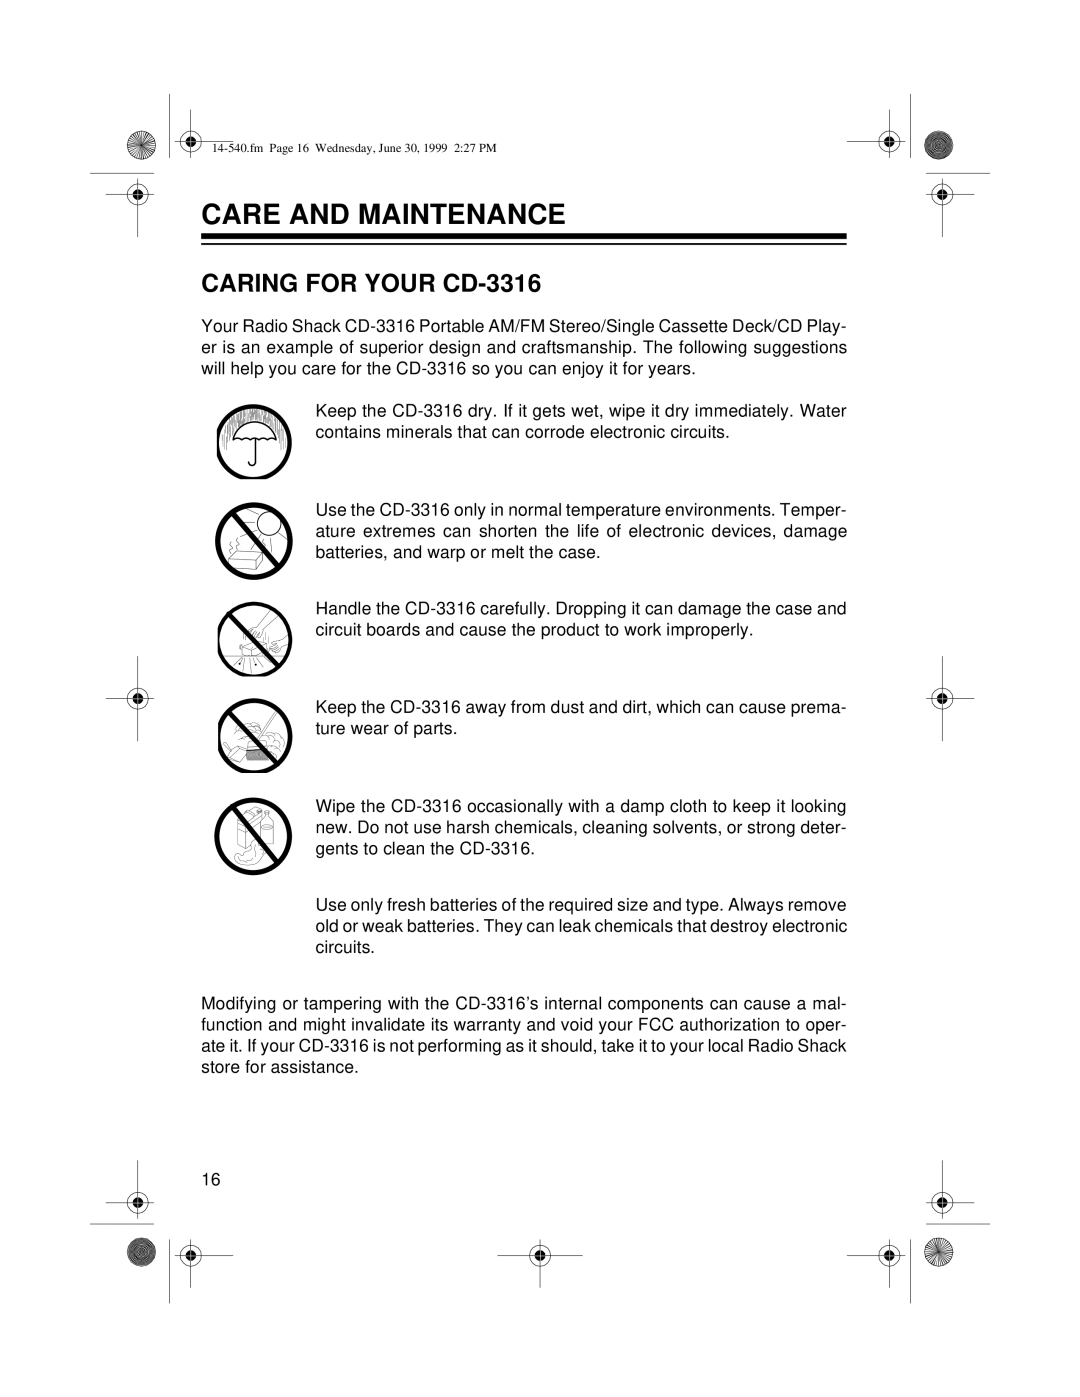 Radio Shack owner manual Care and Maintenance, Caring for Your CD-3316 